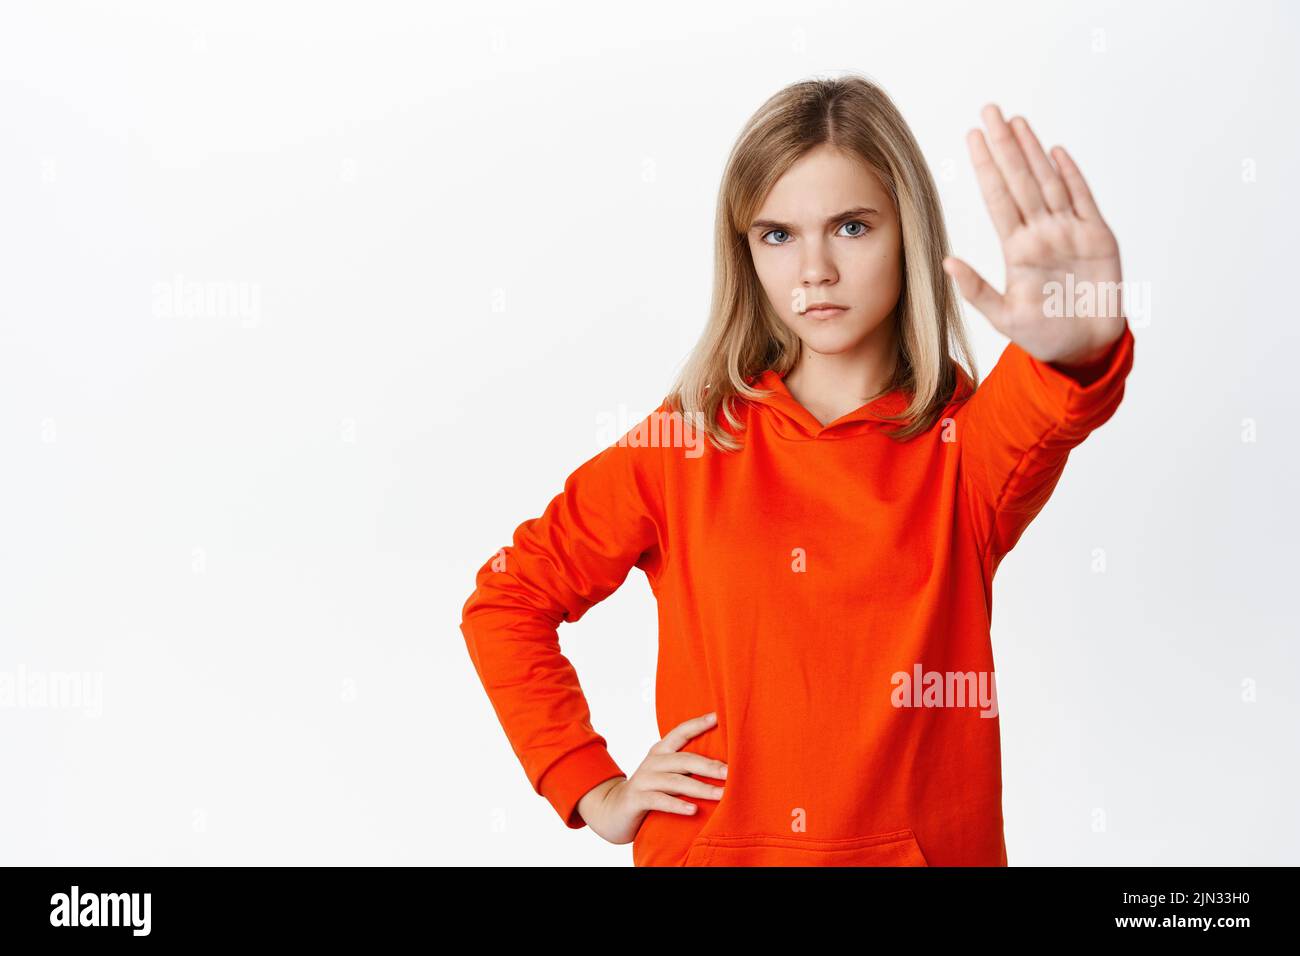 Stop. Little girl looks serious, extends one arm to say no, rejecting, prohibit action, forbid smth, standing in red hoodie over white background Stock Photo